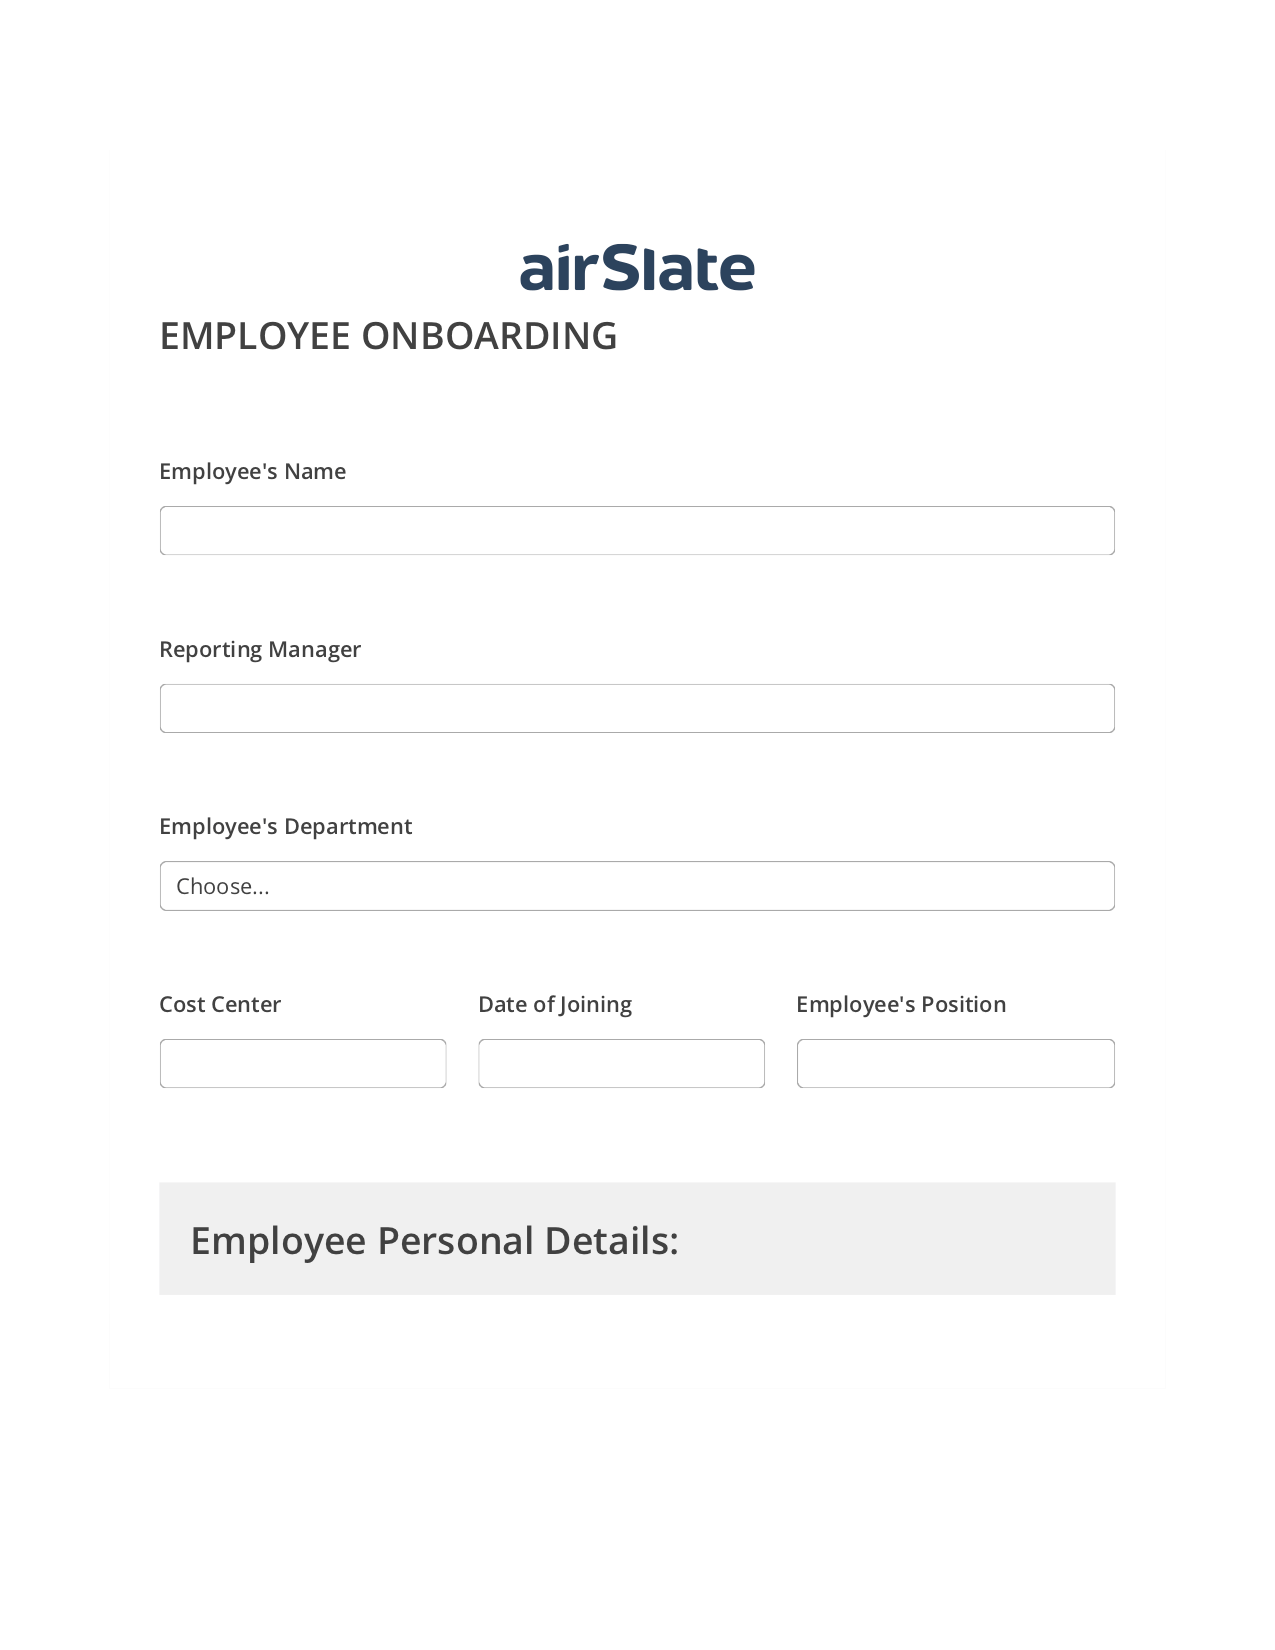 Employee Onboarding Workflow Pre-fill Document Bot, Create NetSuite Record bot, Archive to SharePoint Folder Bot